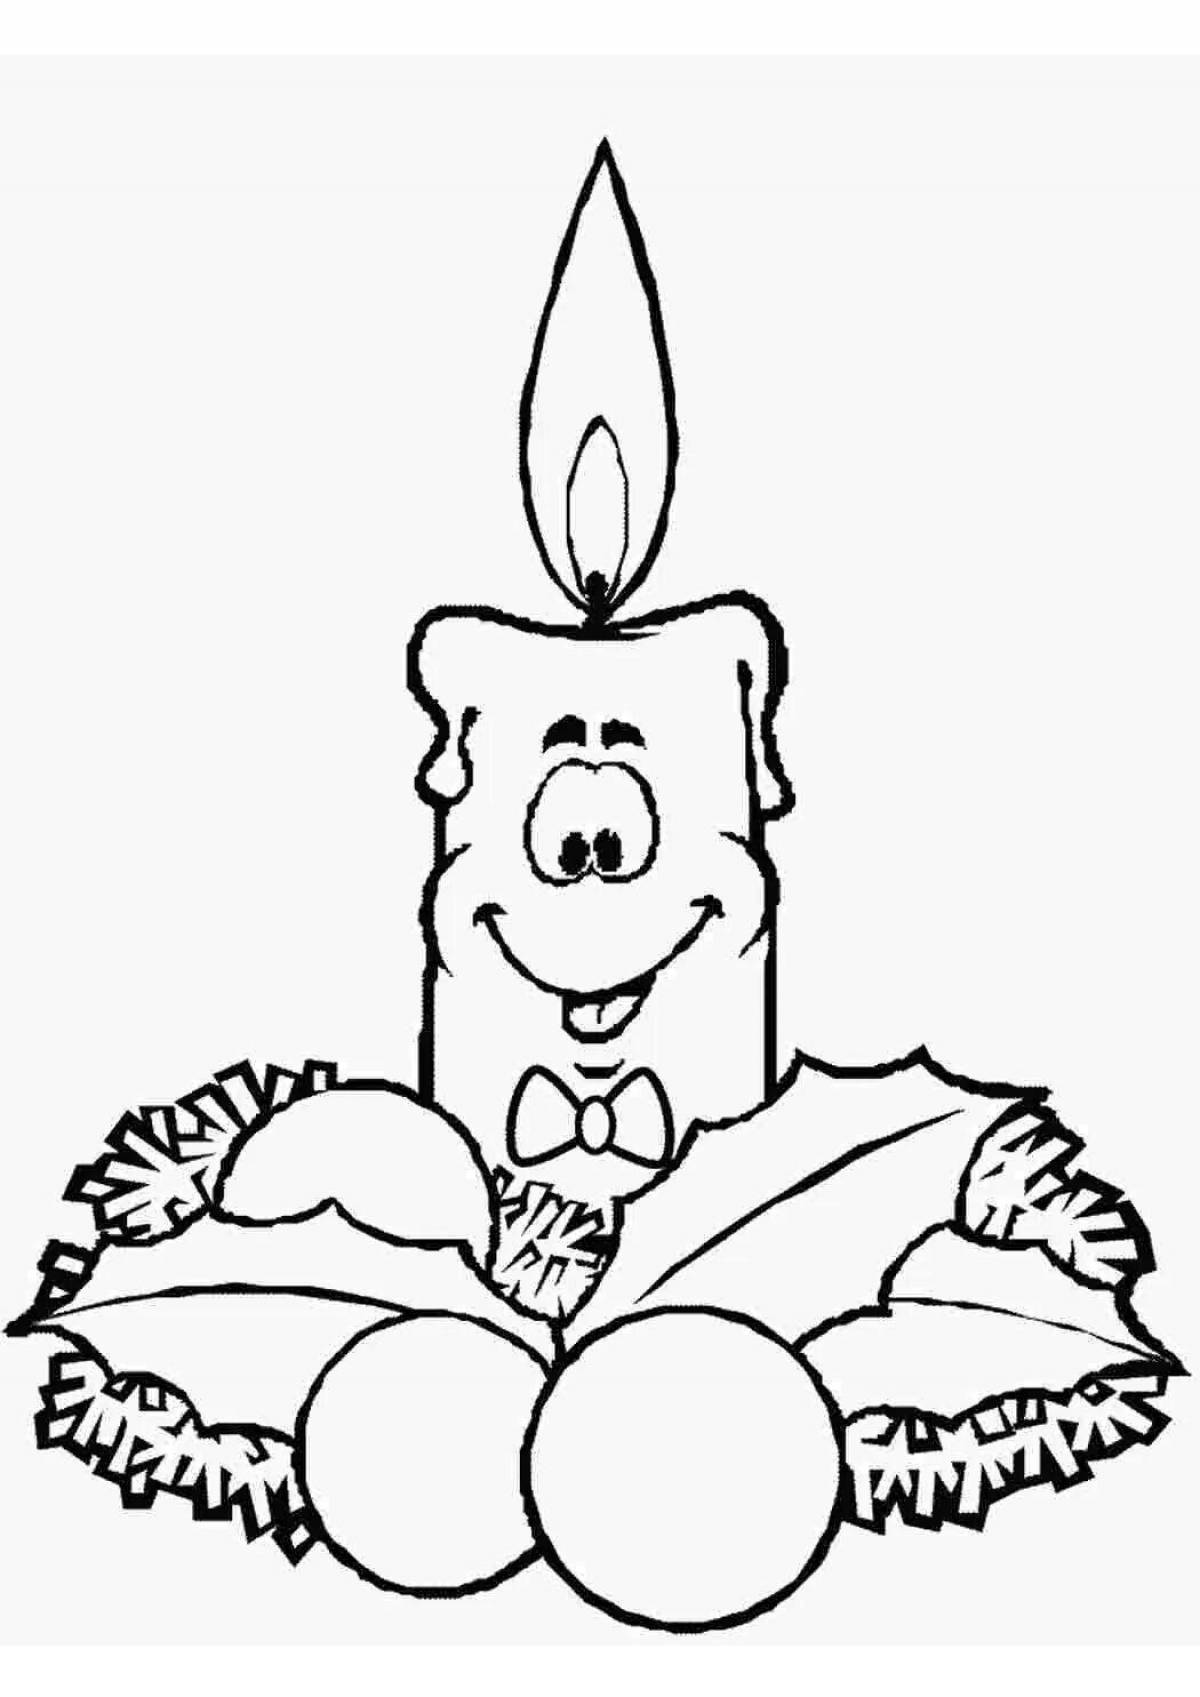 Merry Christmas candle coloring page